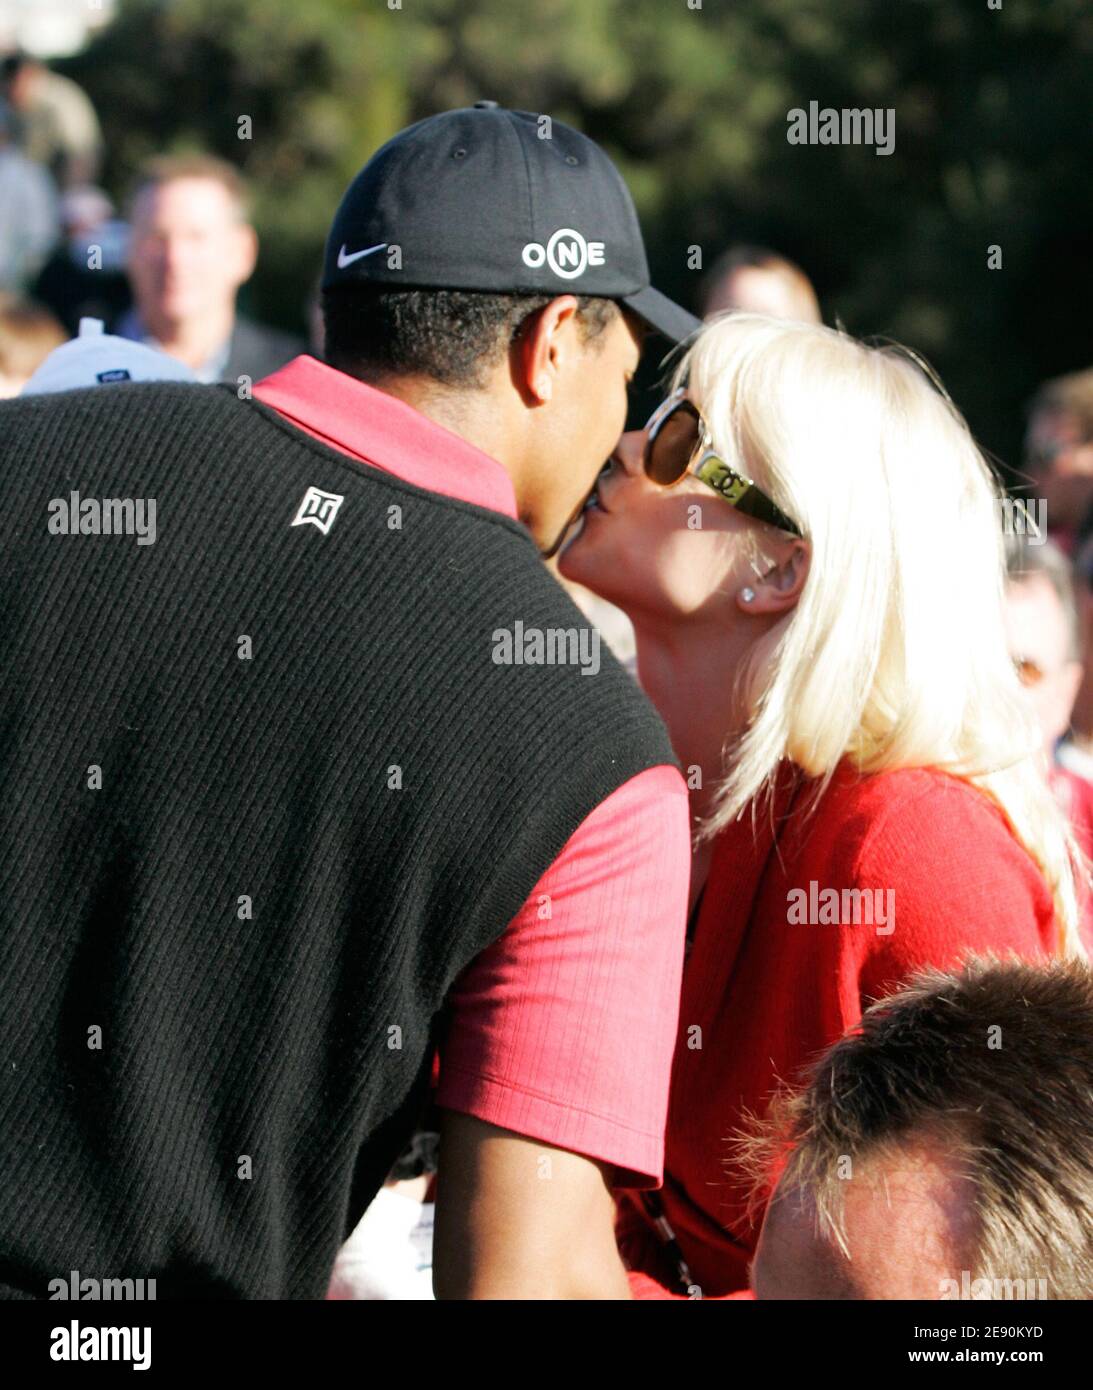 Tiger Woods is congratulated by his wife, Elin Nordegren after winning the Target World Challenge at the Sherwood Country Club in Thousand Oaks, CA, USA on December 16, 2007. Photo by Charles Baus/Cal Sport Media/Cameleon/ABACAPRESS.COM Stock Photo